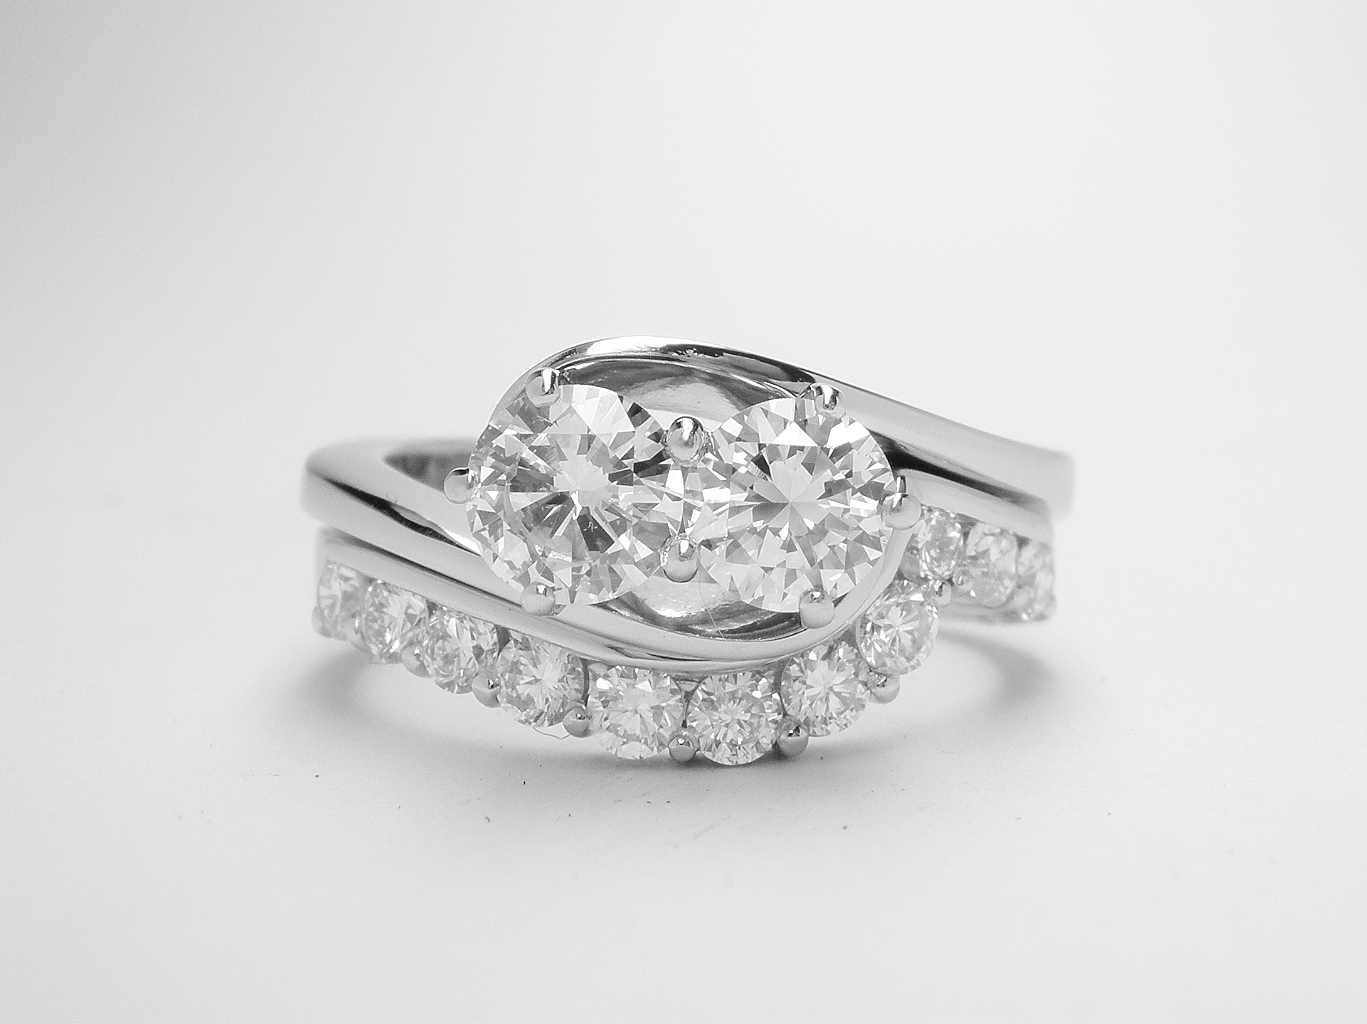 An 11 stone round brilliant cut diamond part channel set ring mounted in platinum and shaped to fit around a 2 stone diamond wrap around ring.